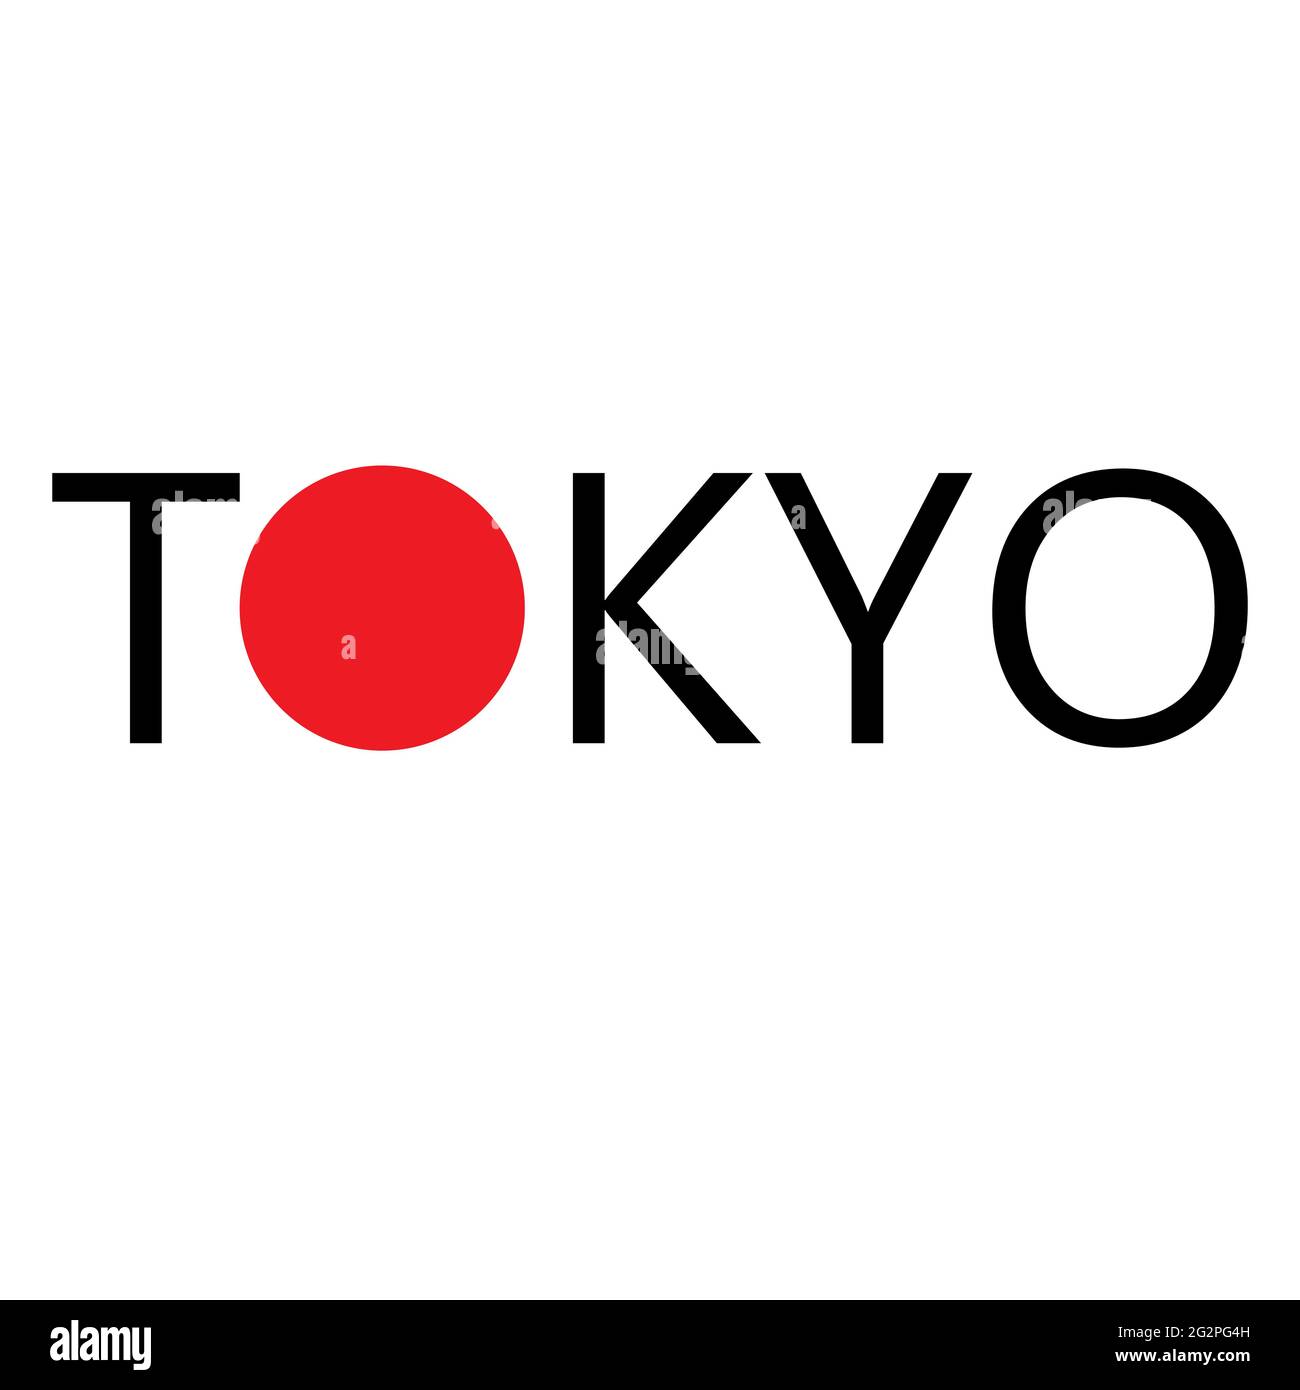 Stylized inscription Tokyo with a red circle on a white background. Tokyo black text on white background. For a logo, t-shirt or other design. Stock Vector